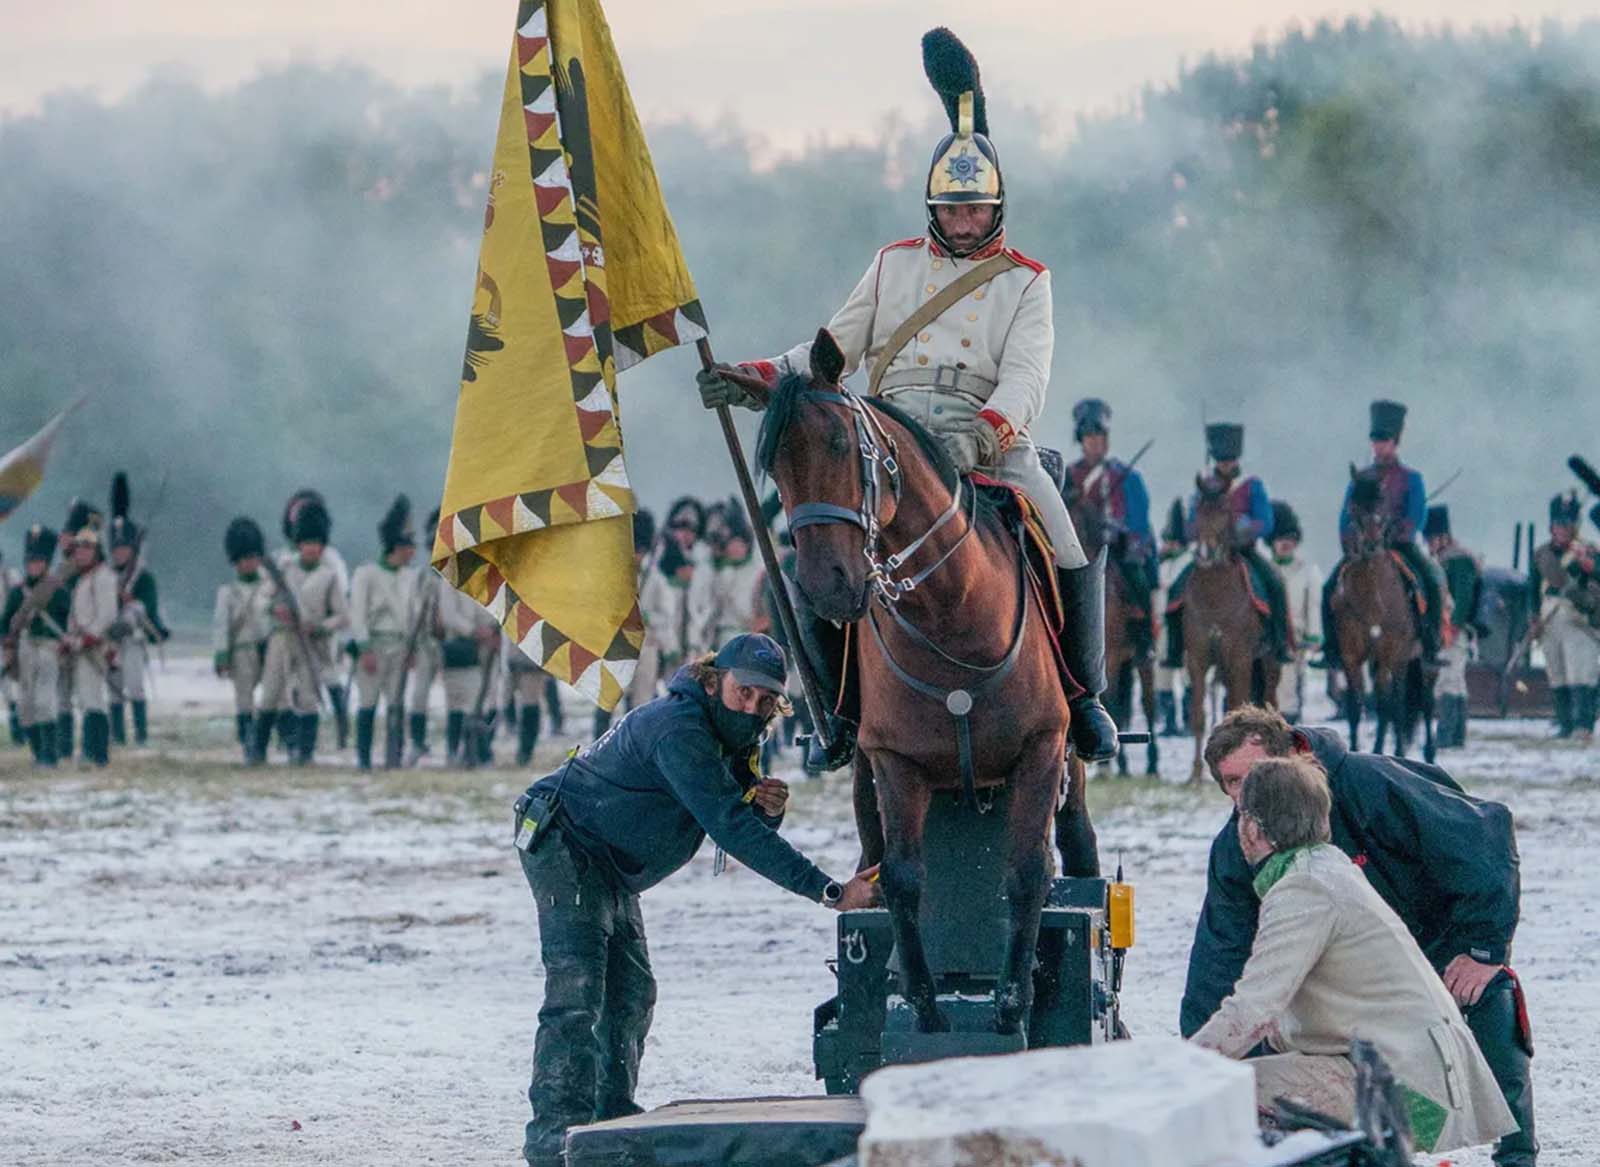 Although roughly 150 horses are thought to have died at the actual Battle of Austerlitz, none were harmed on set. Image © Apple